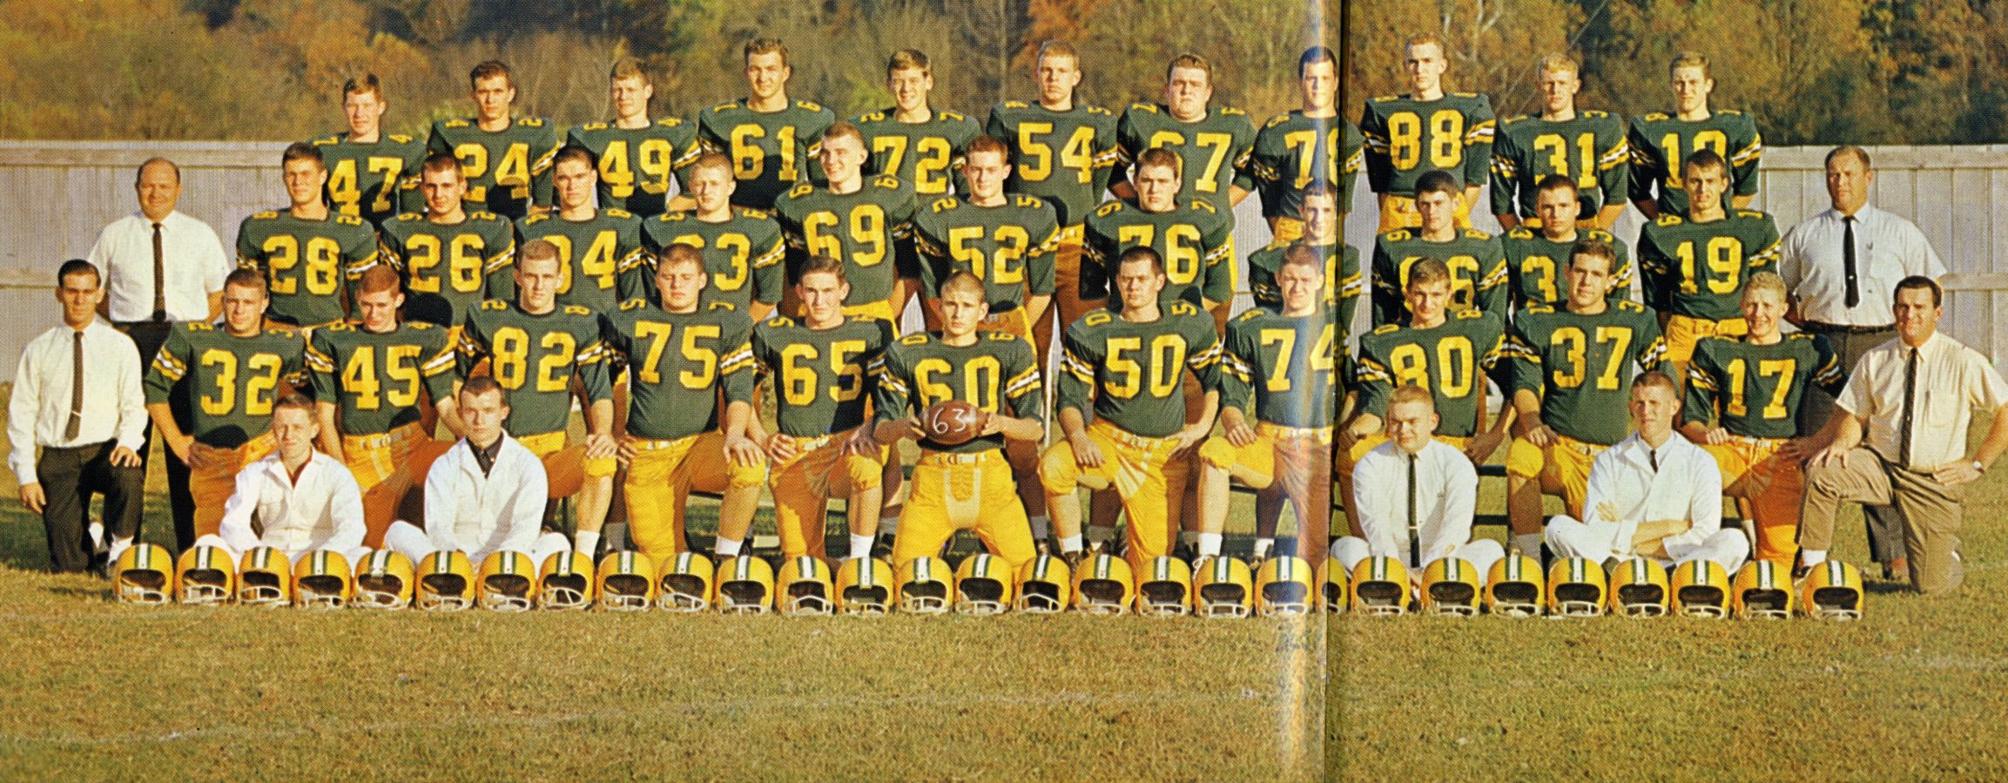 1963 Wilkes Central team to be recognized | News | journalpatriot.com